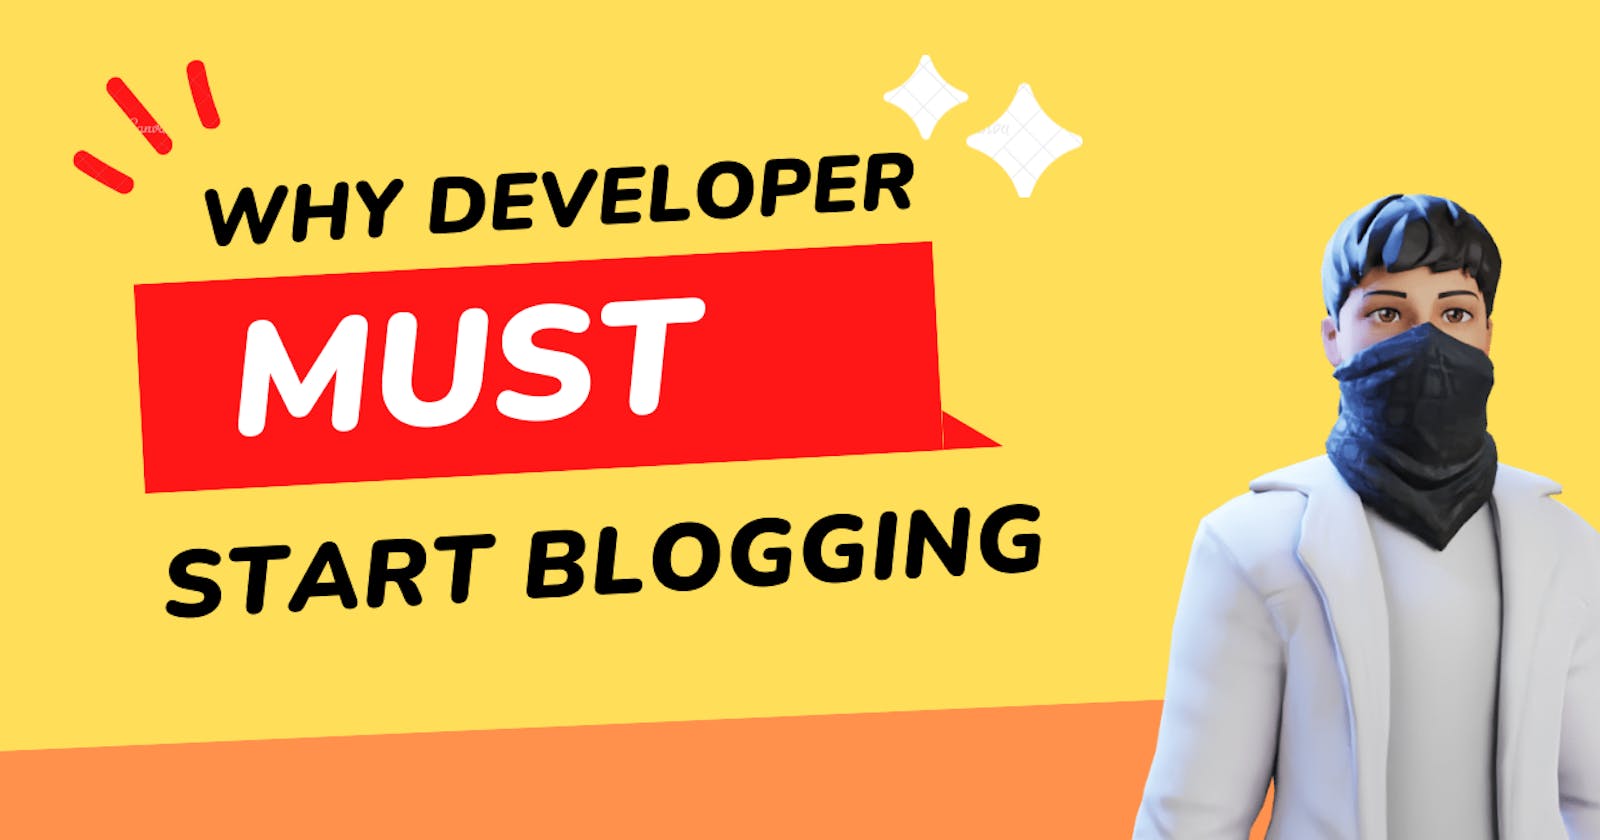 Why developers must start blogging and how to start?